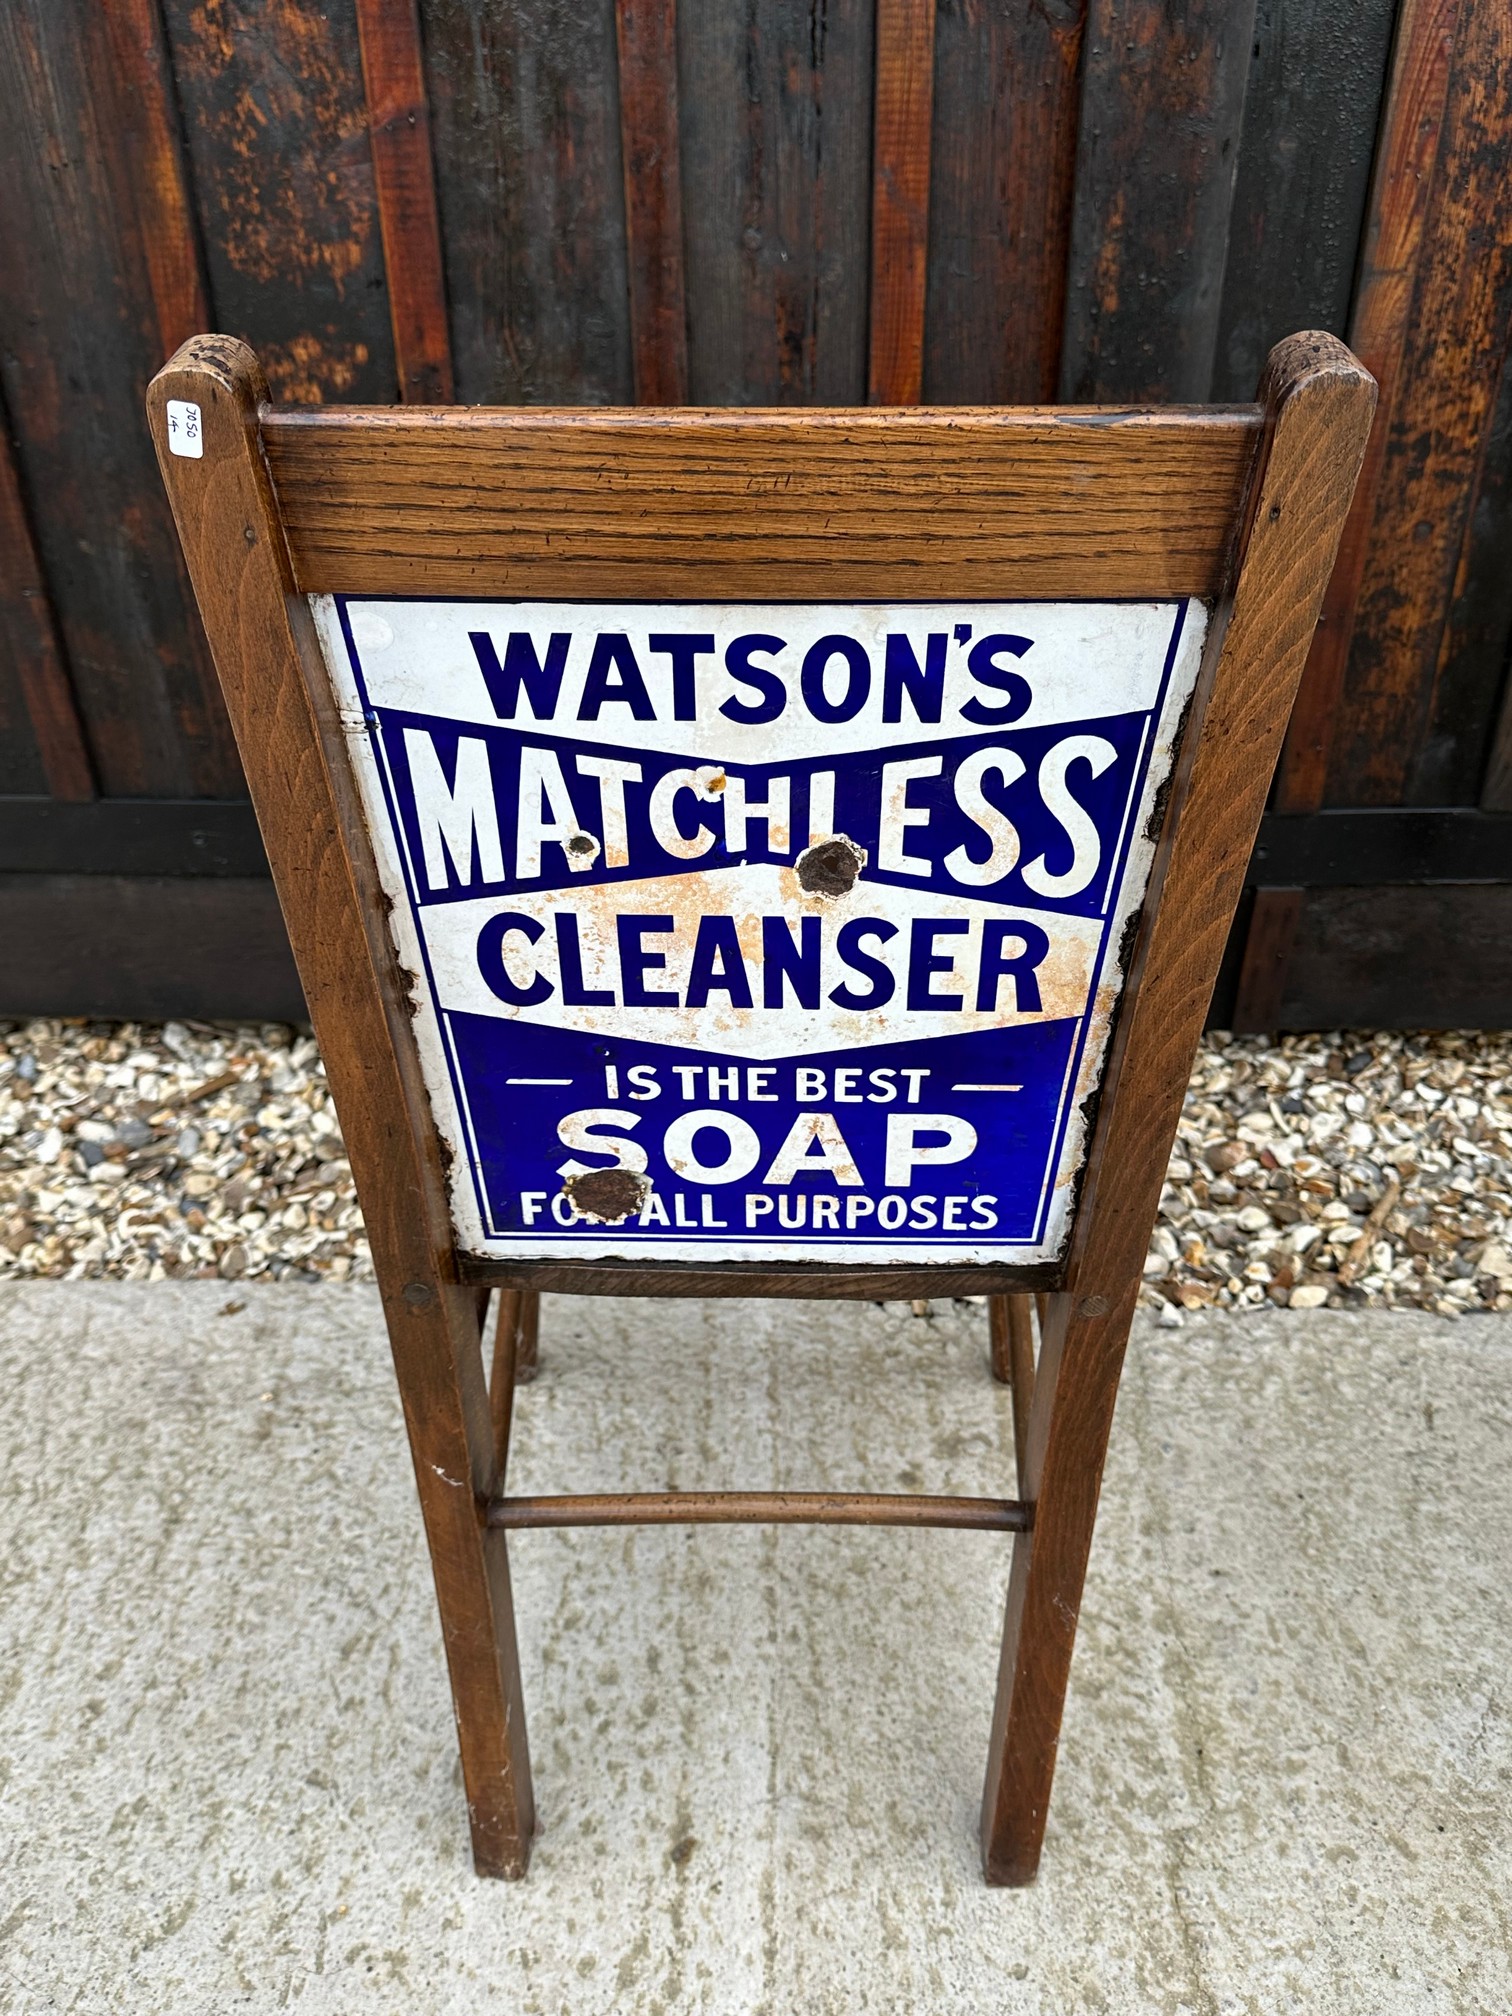 A Nubolic Soap 'A Safe Disinfectant' enamelled back advertising chair with Watson's Matchless - Image 2 of 2